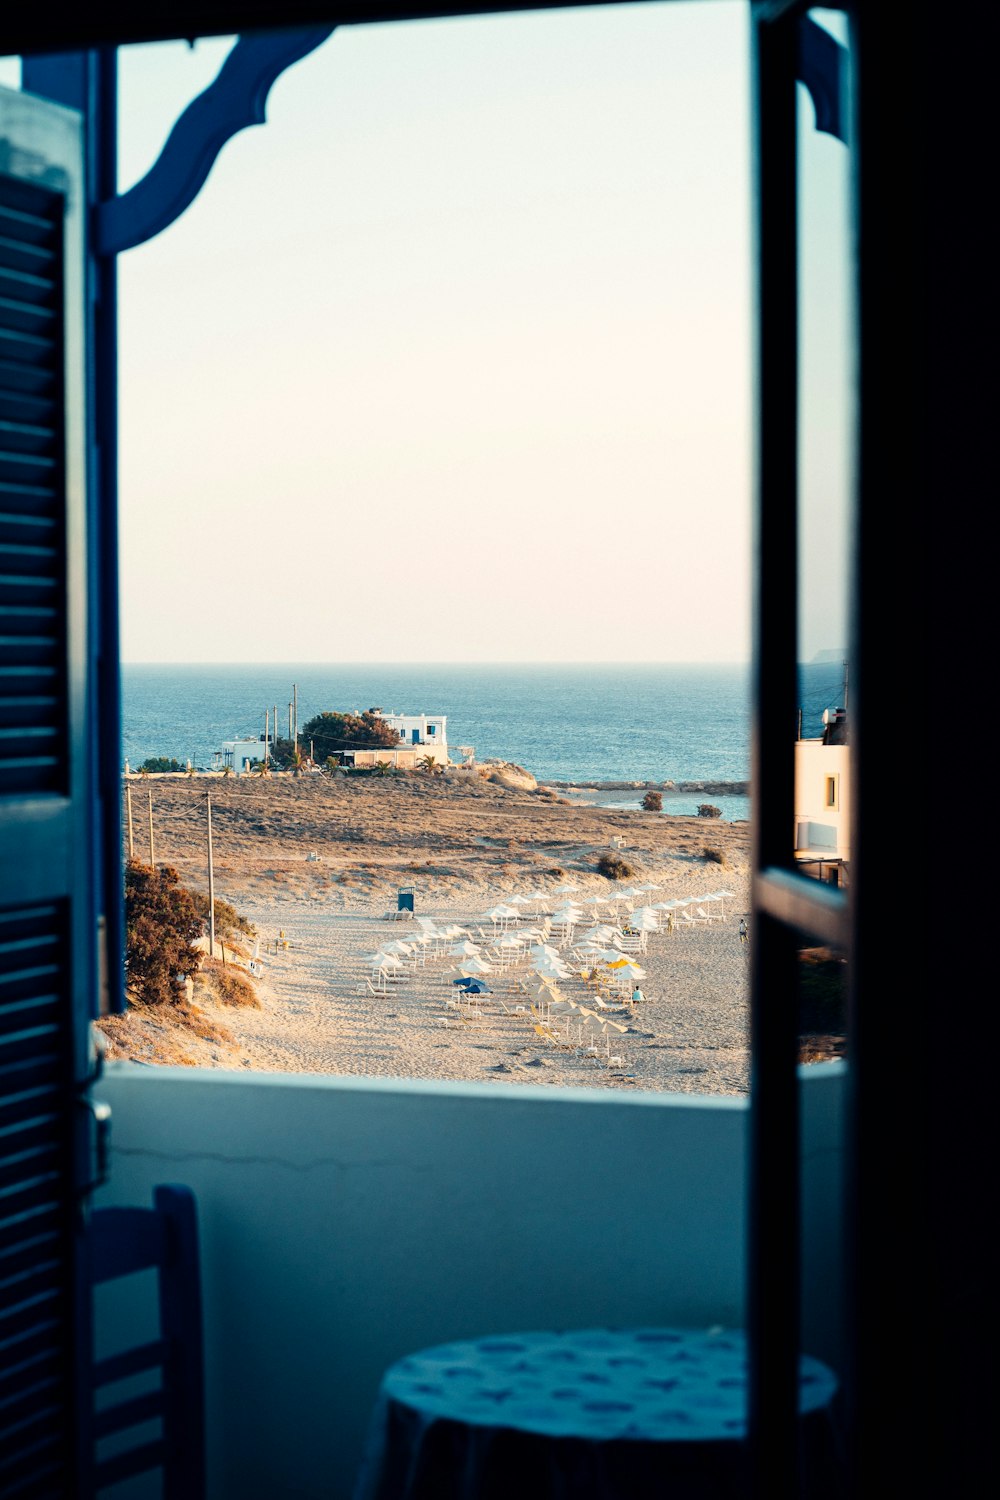 a view of a beach and ocean from a window